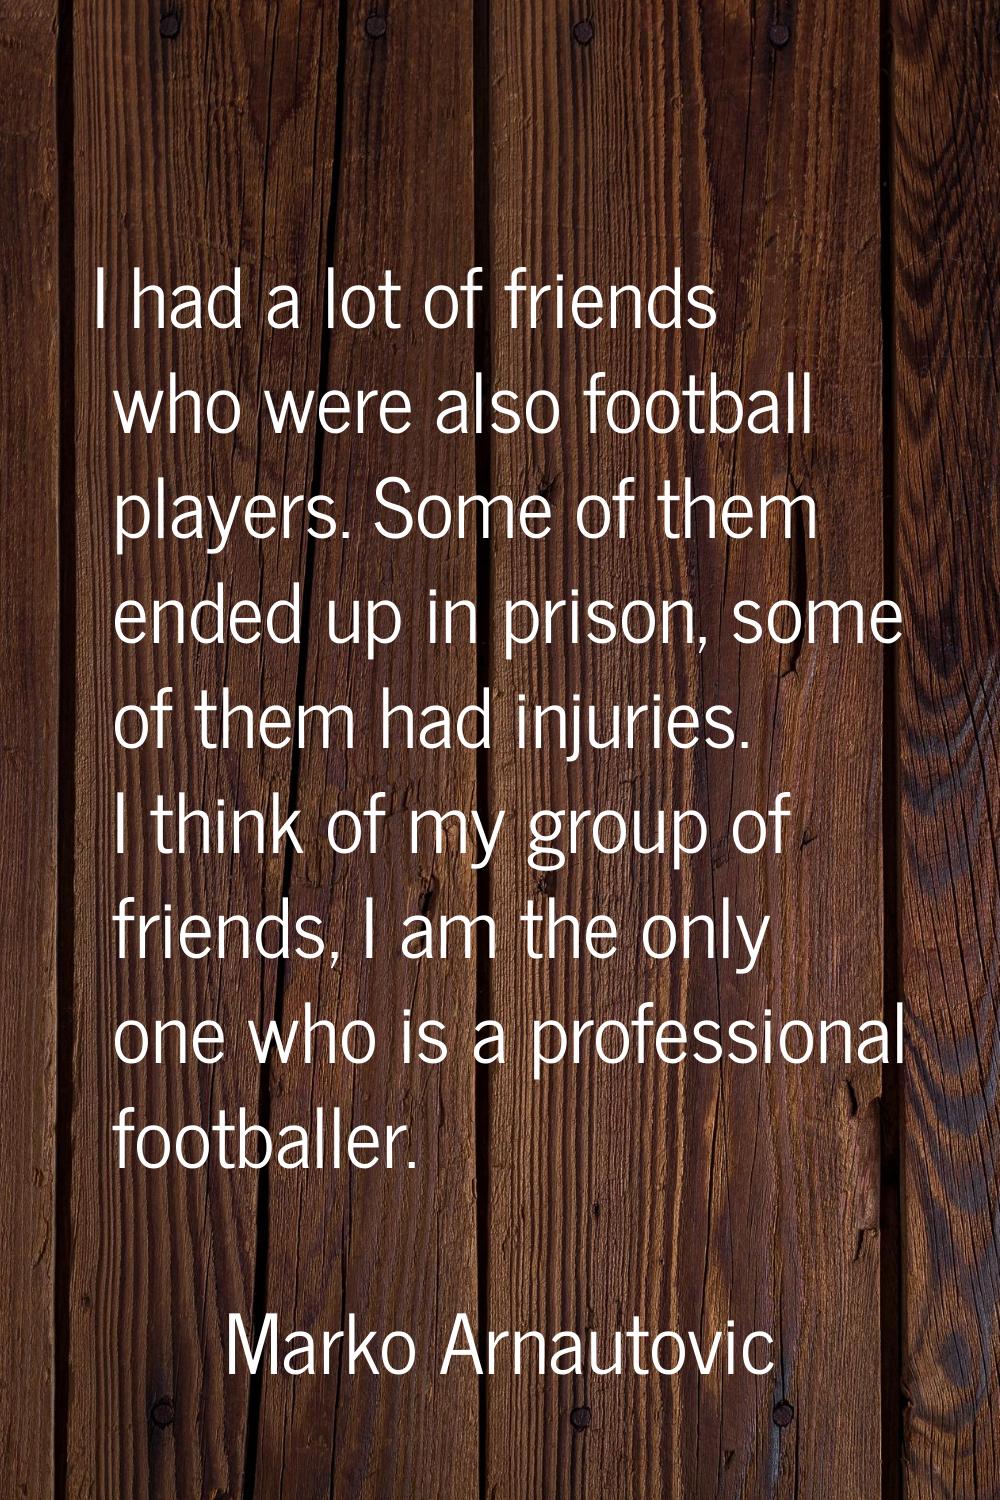 I had a lot of friends who were also football players. Some of them ended up in prison, some of the